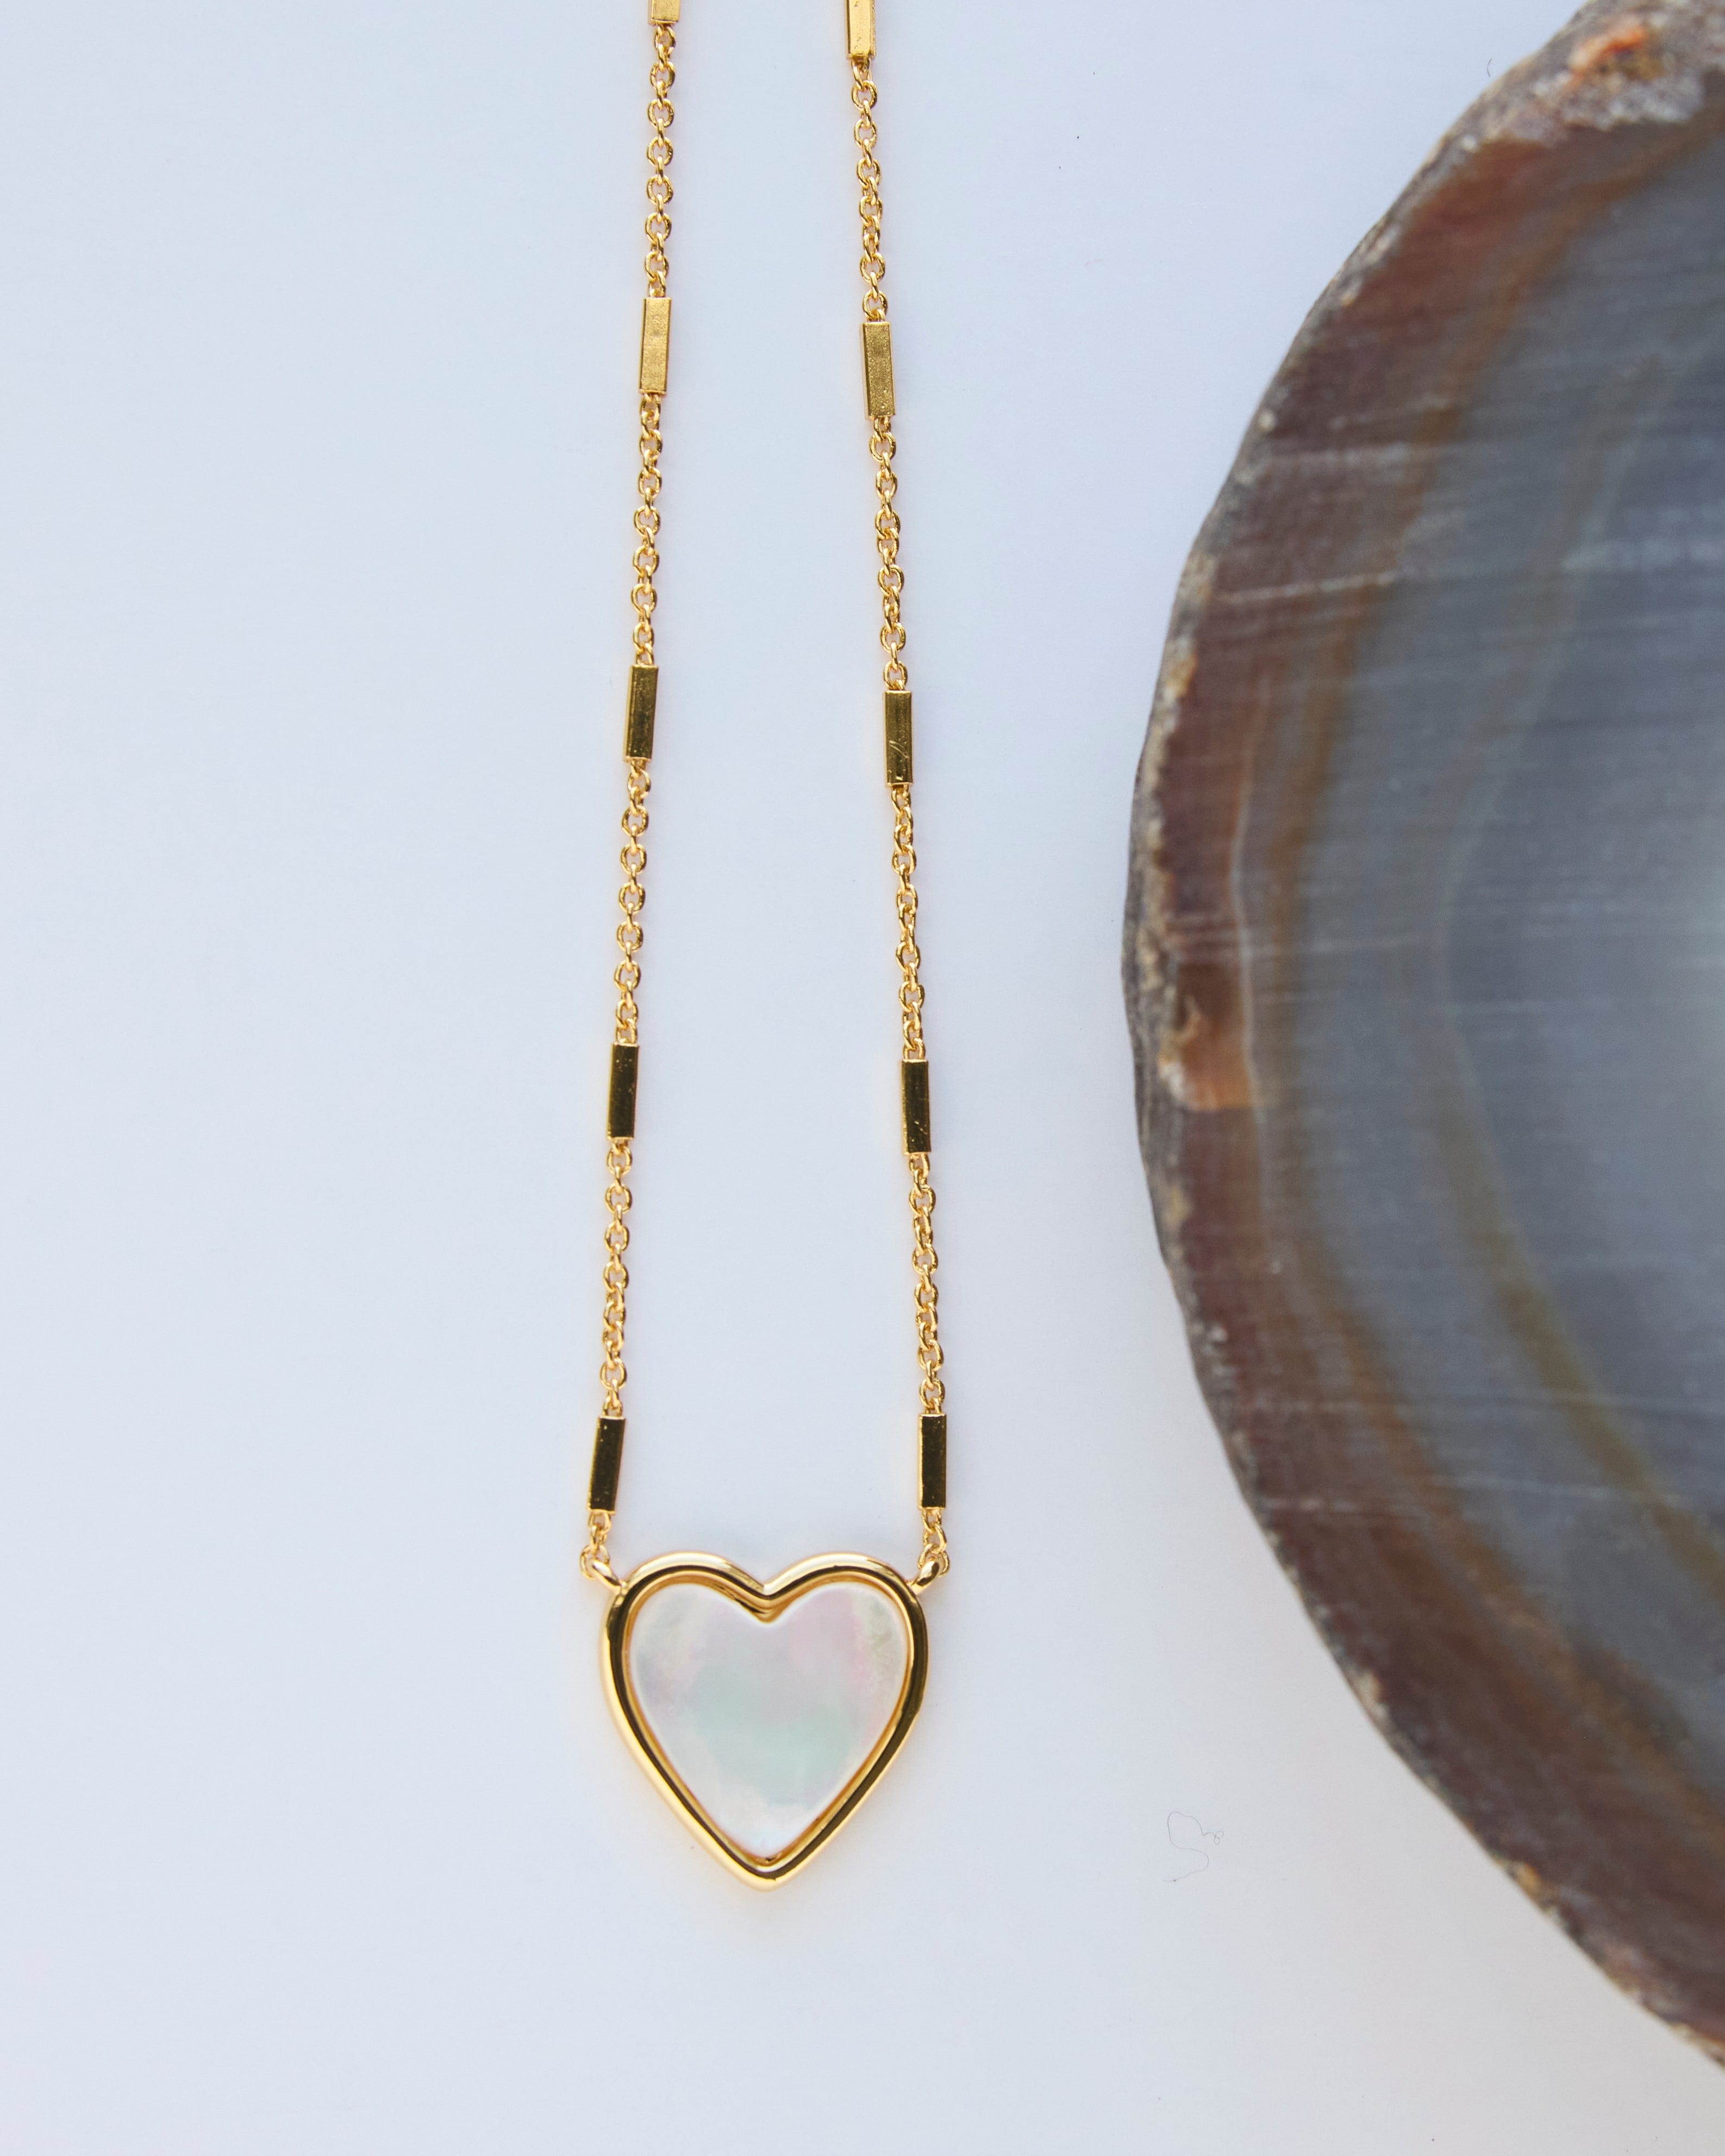 Gold necklace with mother of pearl pendant in heart shape.